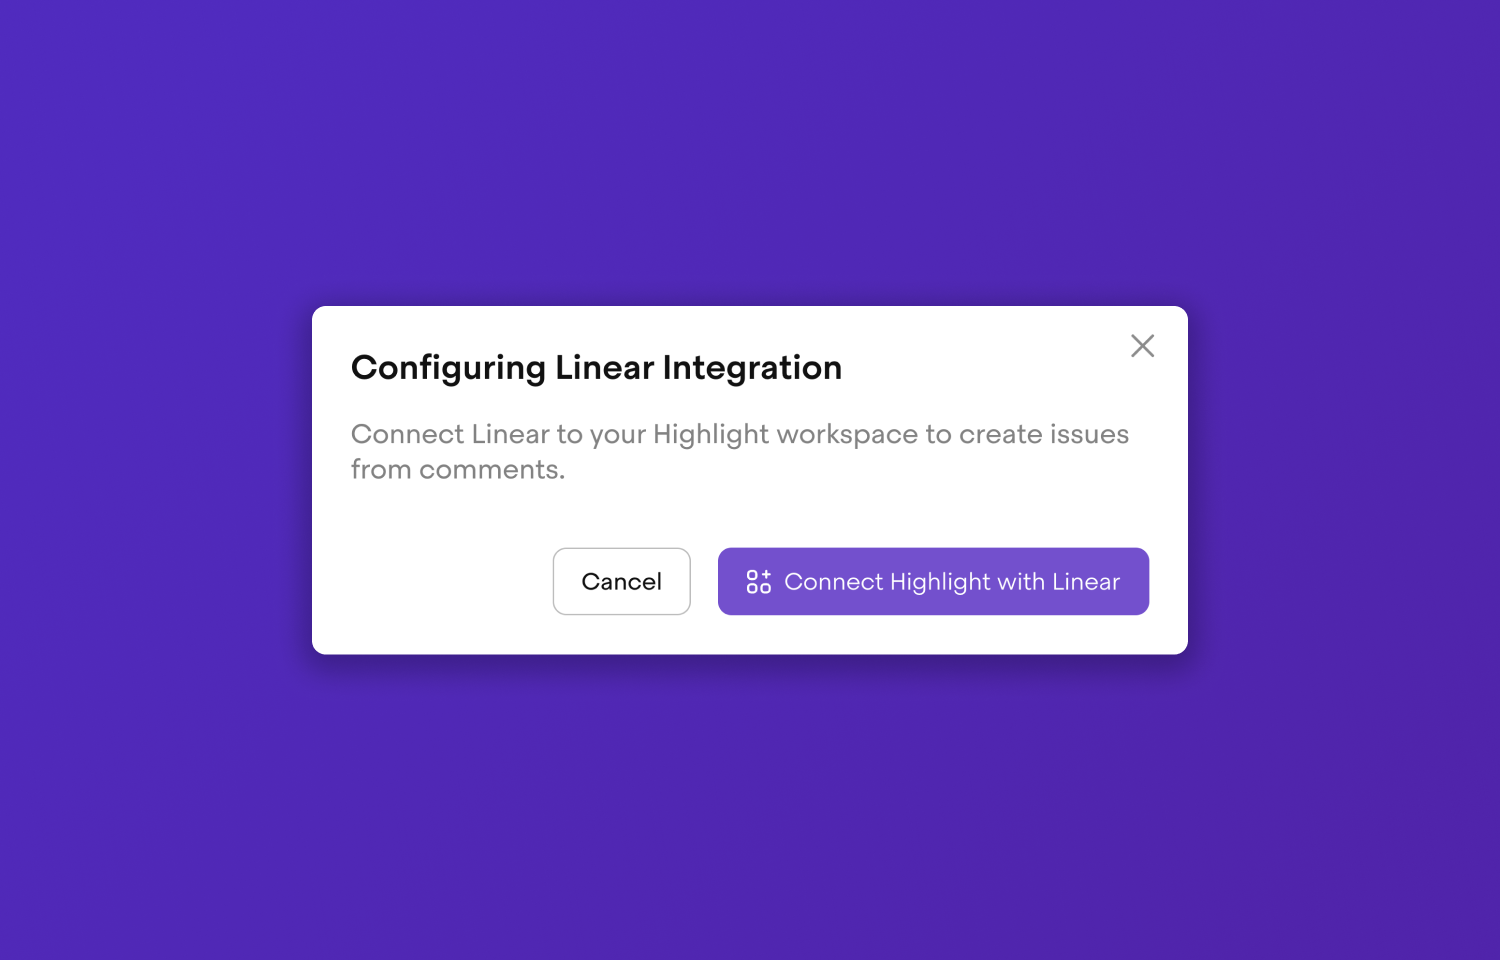 A dialog prompting the user to "Connect Highlight with Linear".